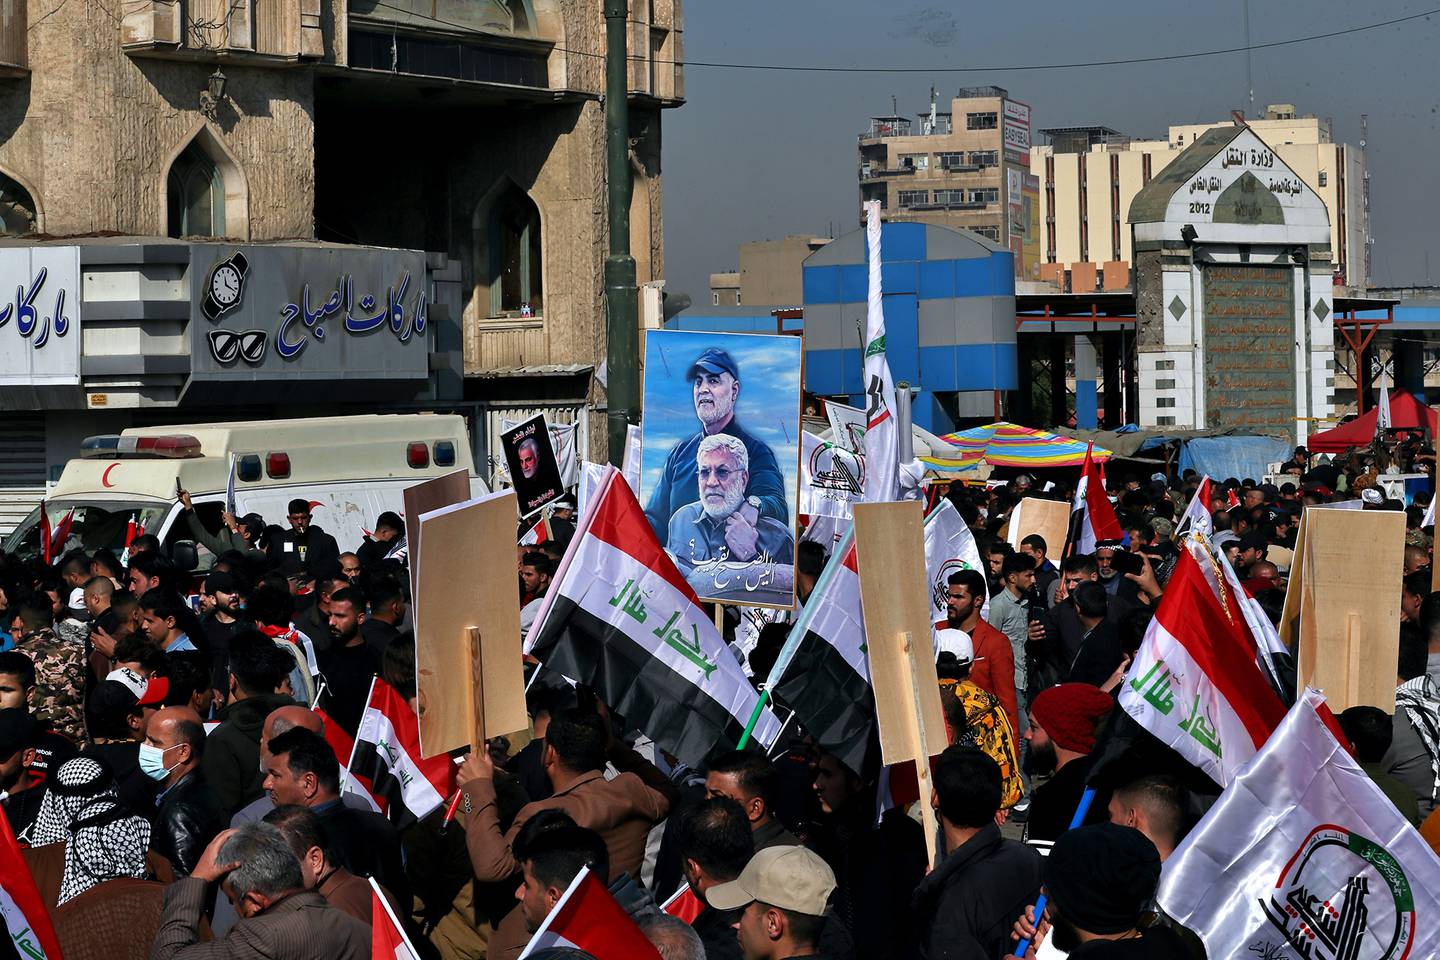 Supporters of the Popular Mobilization Forces hold a poster of Abu Mahdi al-Muhandis, deputy commander of the Popular Mobilization Forces, front, and Gen. Qassem Soleimani, head of Iran's Quds force during a protest, in Tahrir Square, Iraq, Sunday, Jan. 3, 2021.